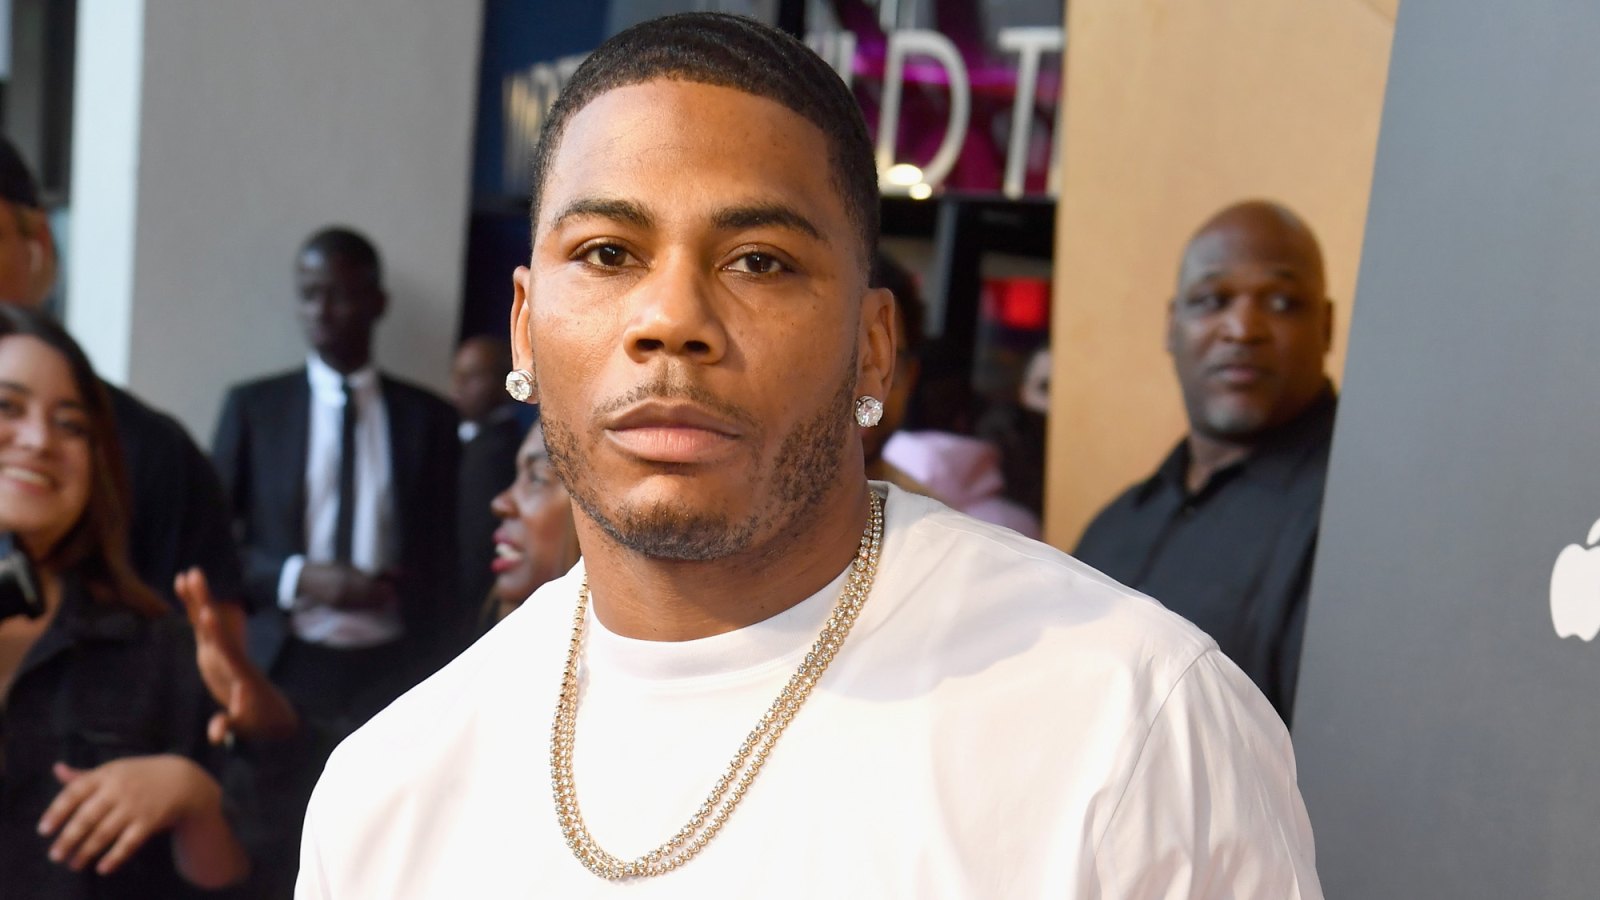 Rapper Nelly Criminal Investigation in England for Alleged Sexual Assault